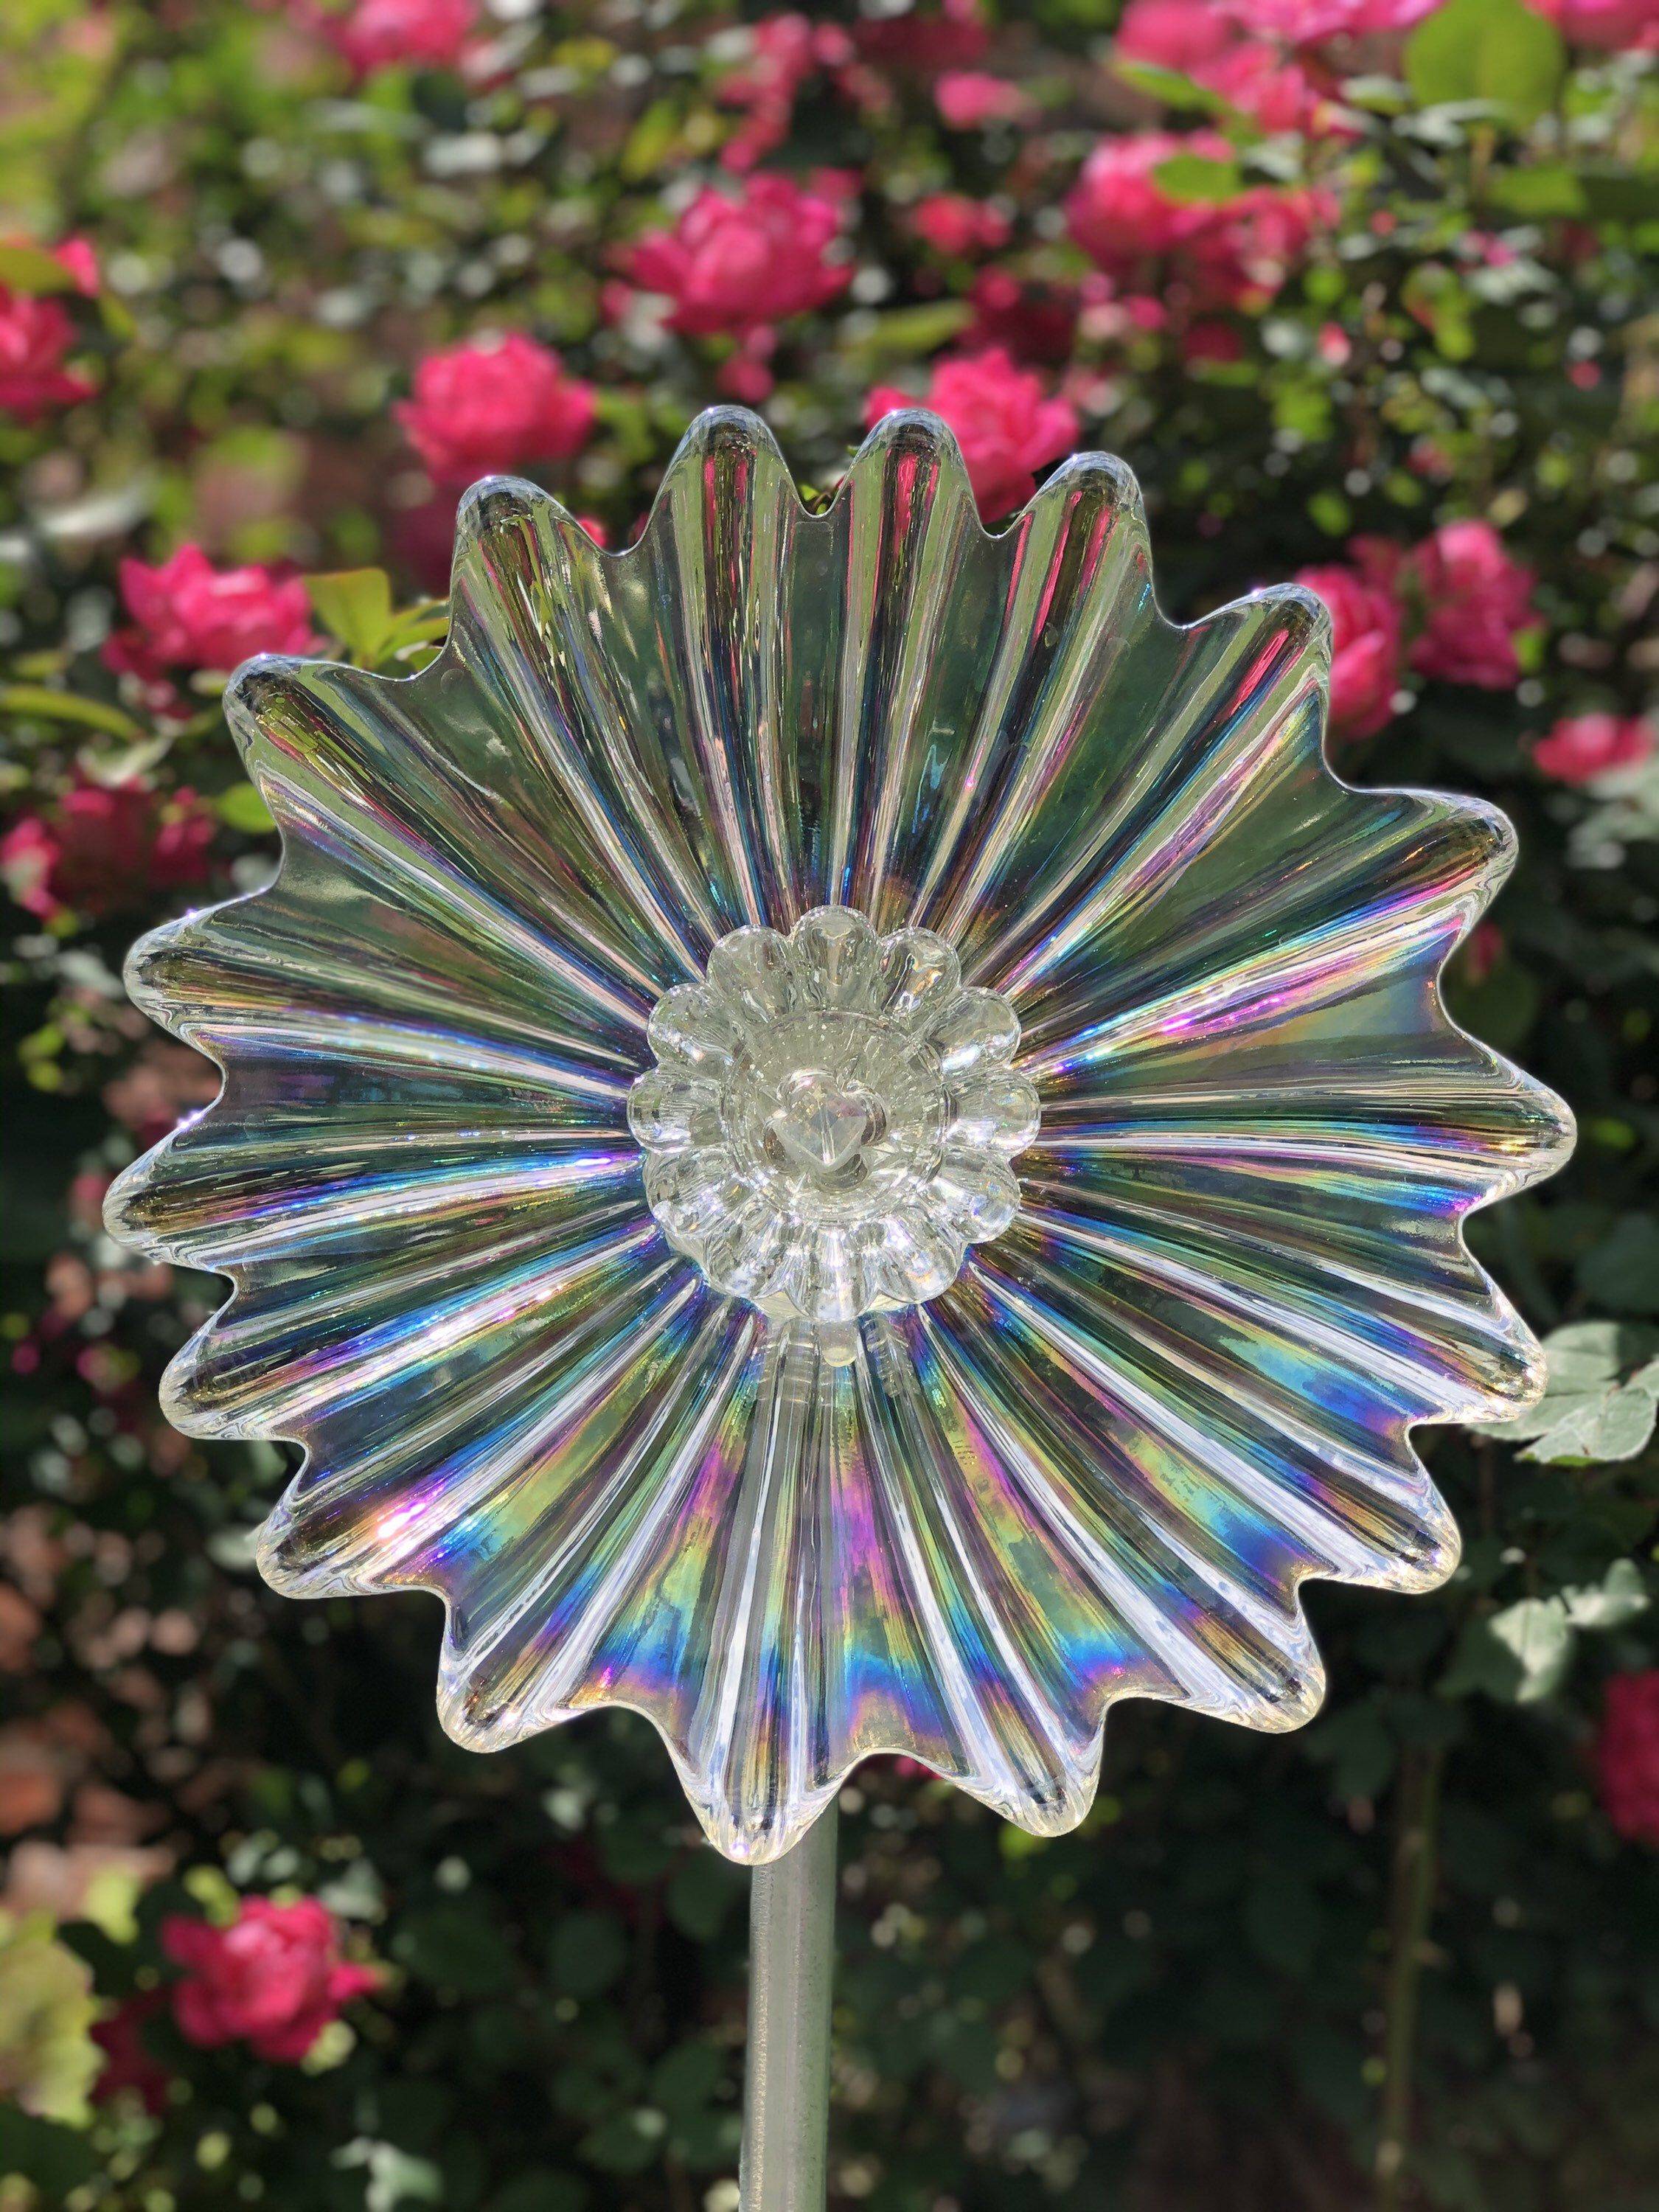 Vintage Recycled Glass Flower Yard Art Garden Art Projects